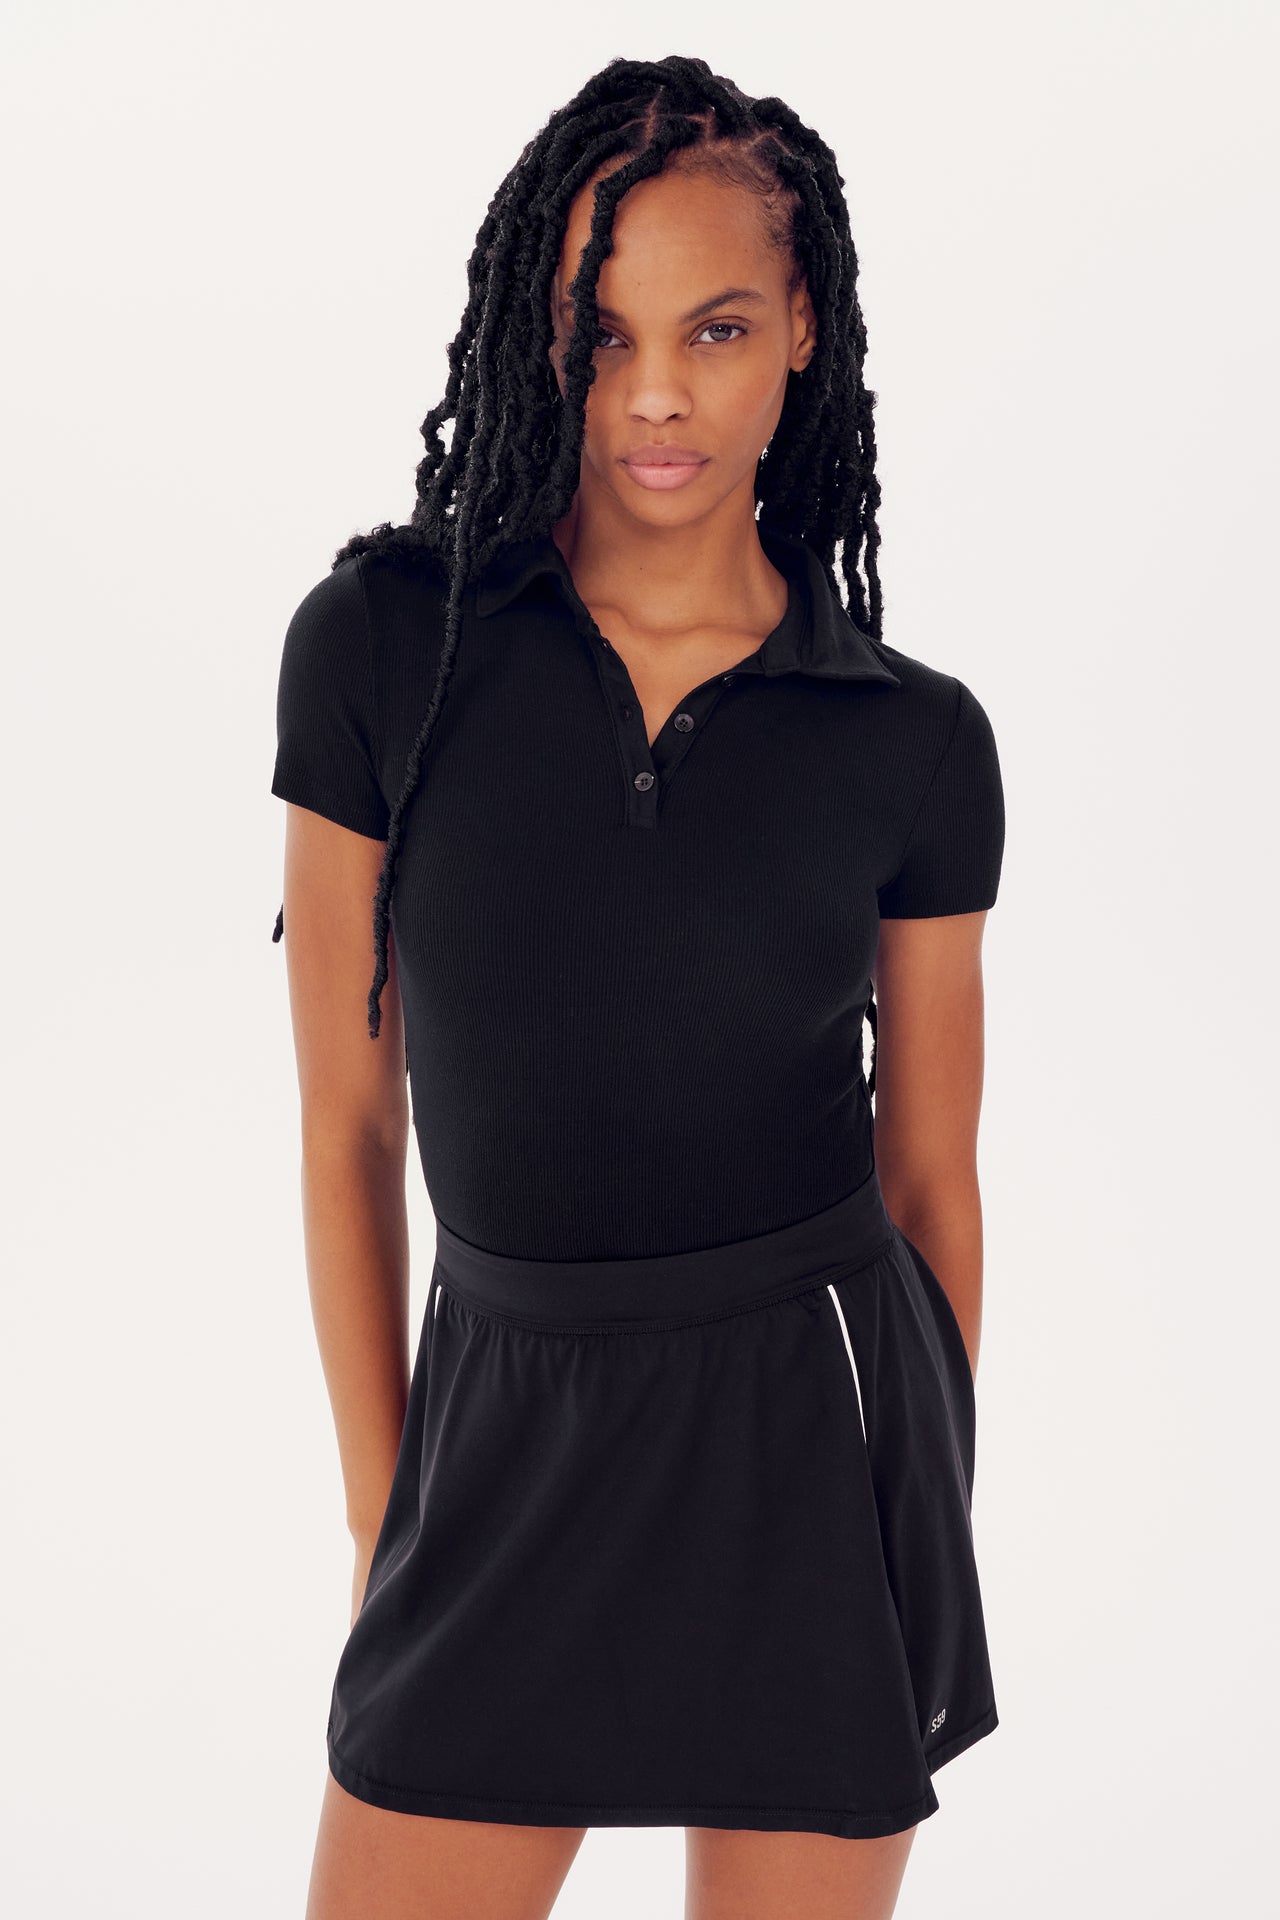 A young woman with braided hair, wearing a SPLITS59 Talia Rib Polo in Black and skirt, stands confidently against a white background.